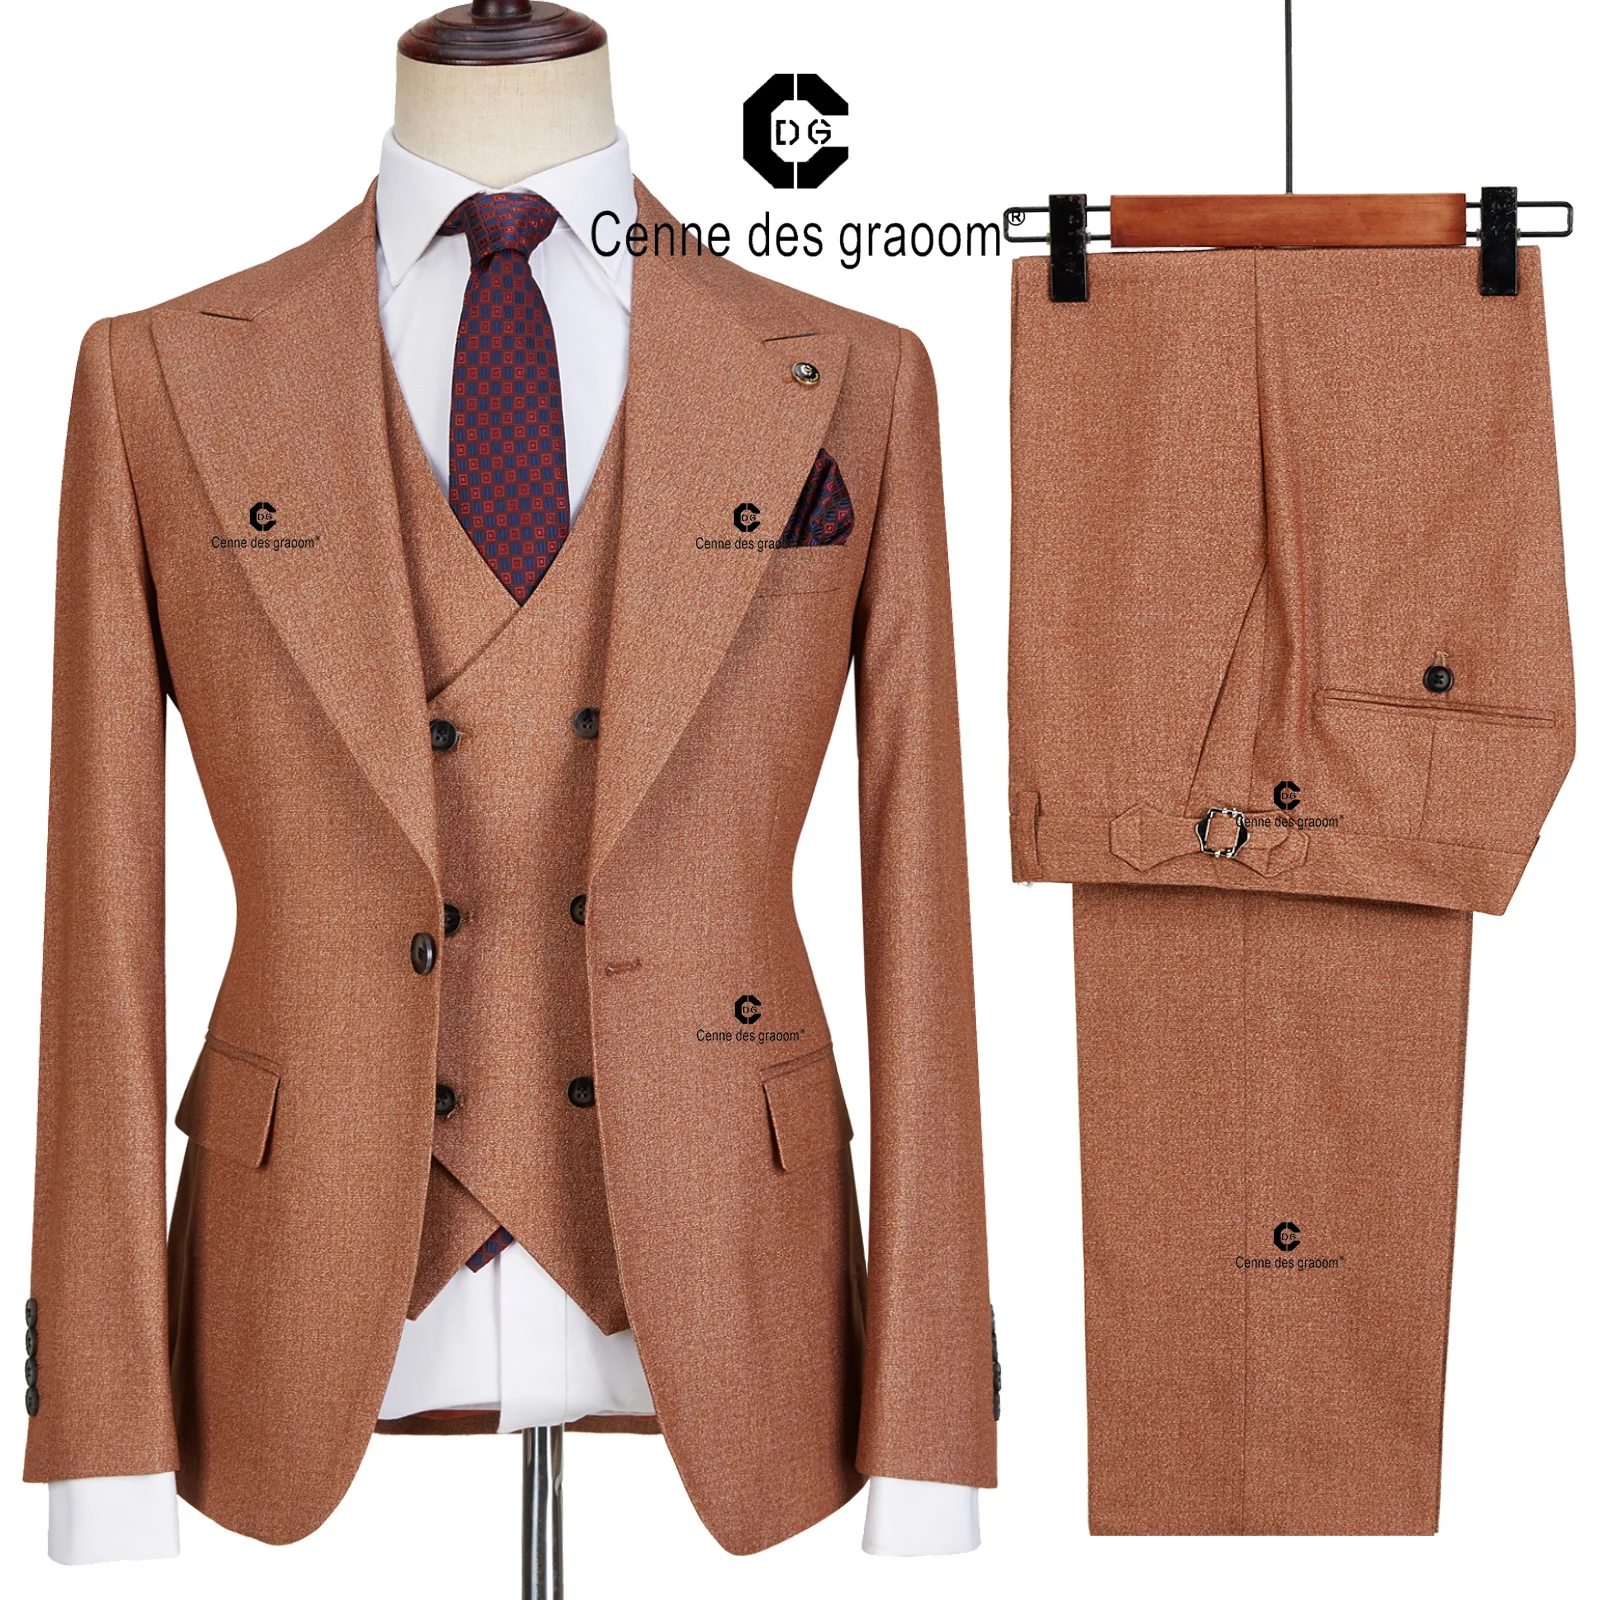 Cenne Des Graoom 2022 New Collection Brown Suits For Men Tailor-Made Wedding Groom 3 Pieces Single Button Blazers Vest Pants